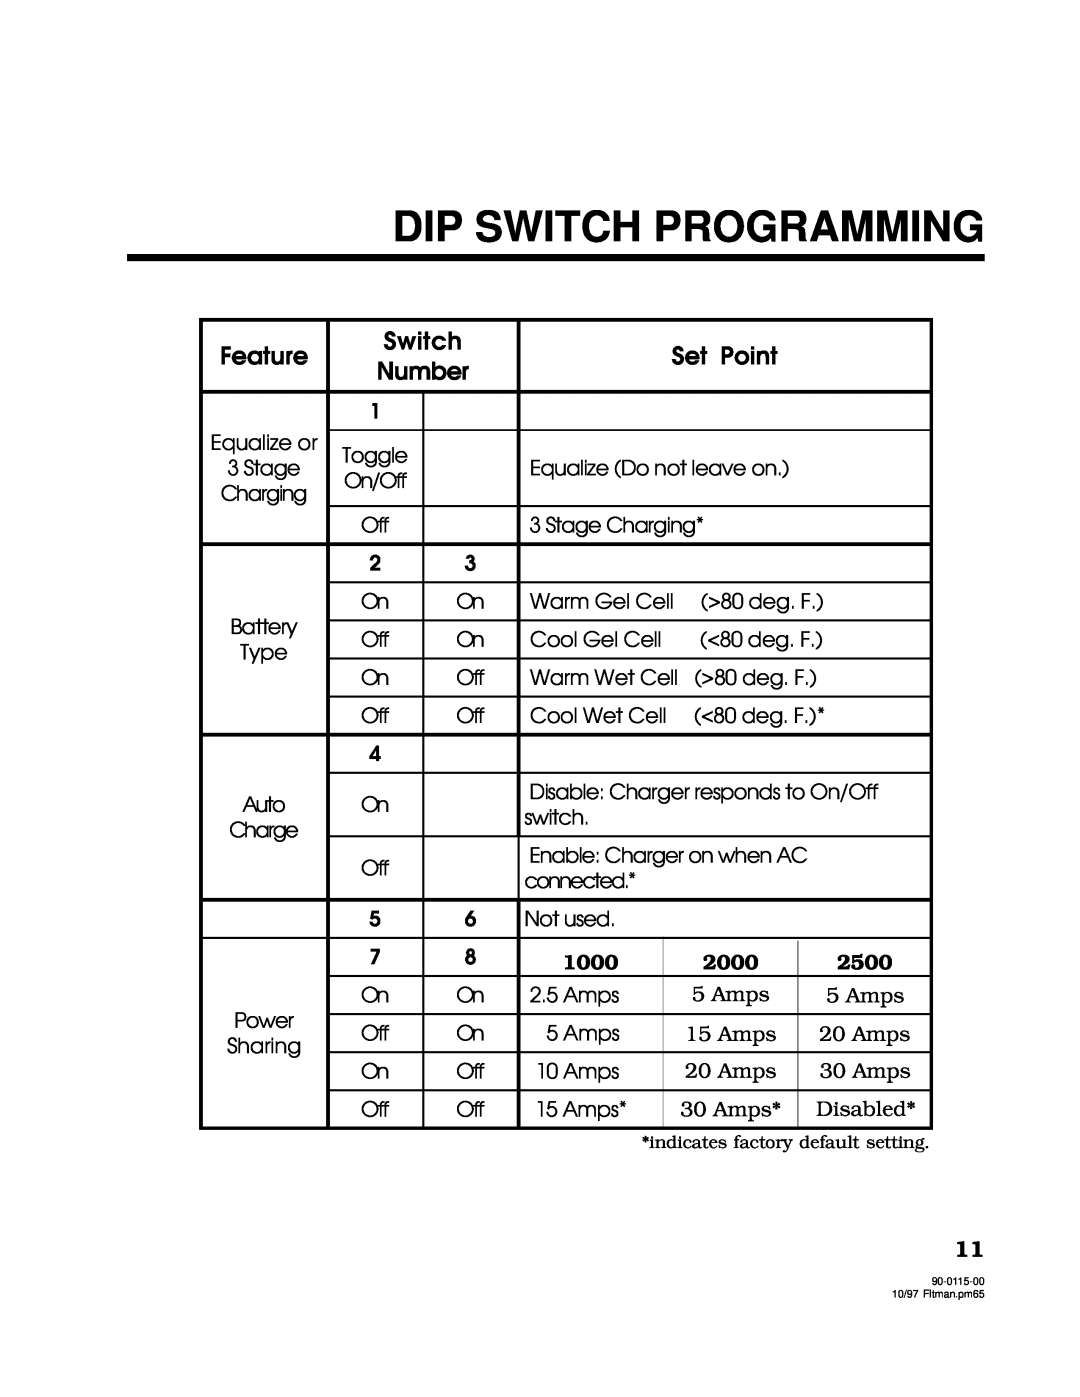 Xantrex Technology 2000 owner manual Dip Switch Programming, Feature, Set Point, Number, 1000, 2500 